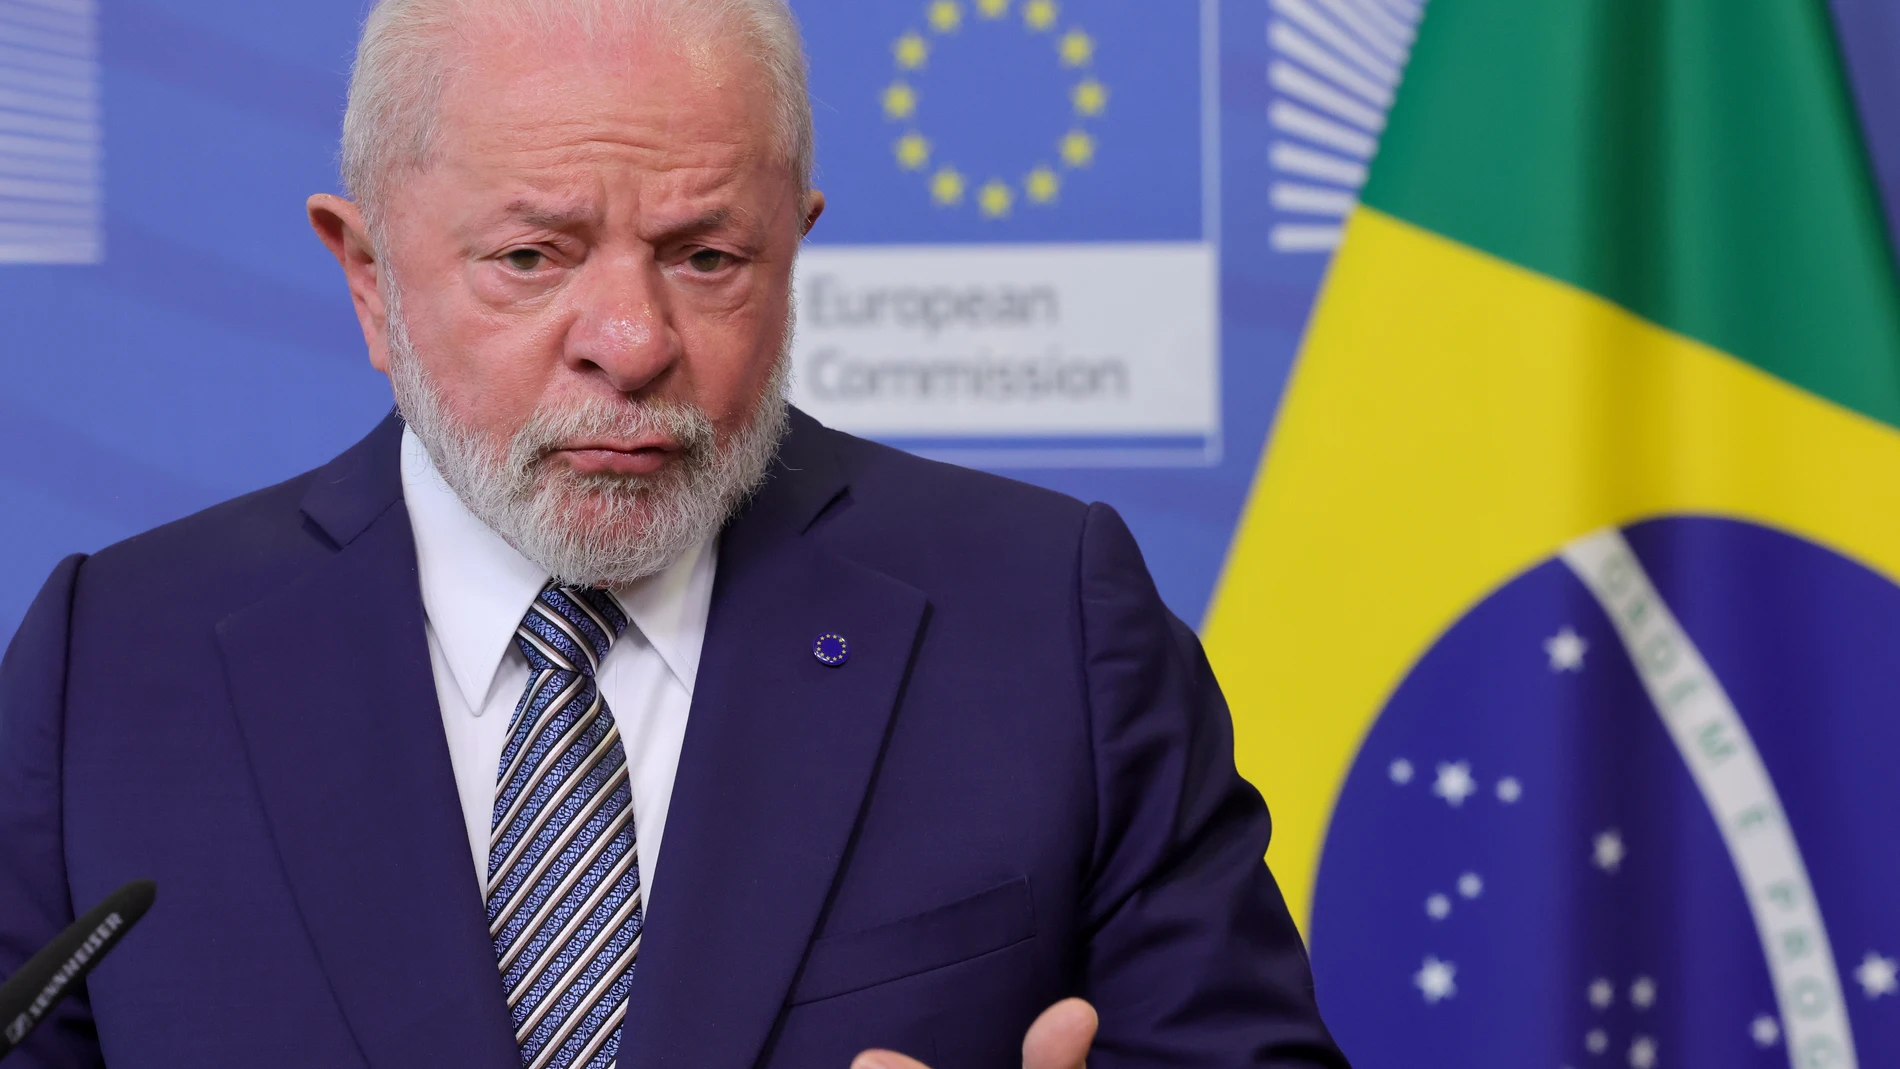 Brussels (Belgium), 17/07/2023.- Brazil's President Luiz Inacio Lula da Silva addresses members of the media prior to a meeting with the President of the European Commission in Brussels, Belgium, 17 July 2023, on the day of the third EU-CELAC summit between leaders from the EU and the Community of Latin American and Caribbean States (CELAC). (Bélgica, Brasil, Bruselas) EFE/EPA/OLIVIER MATTHYS 